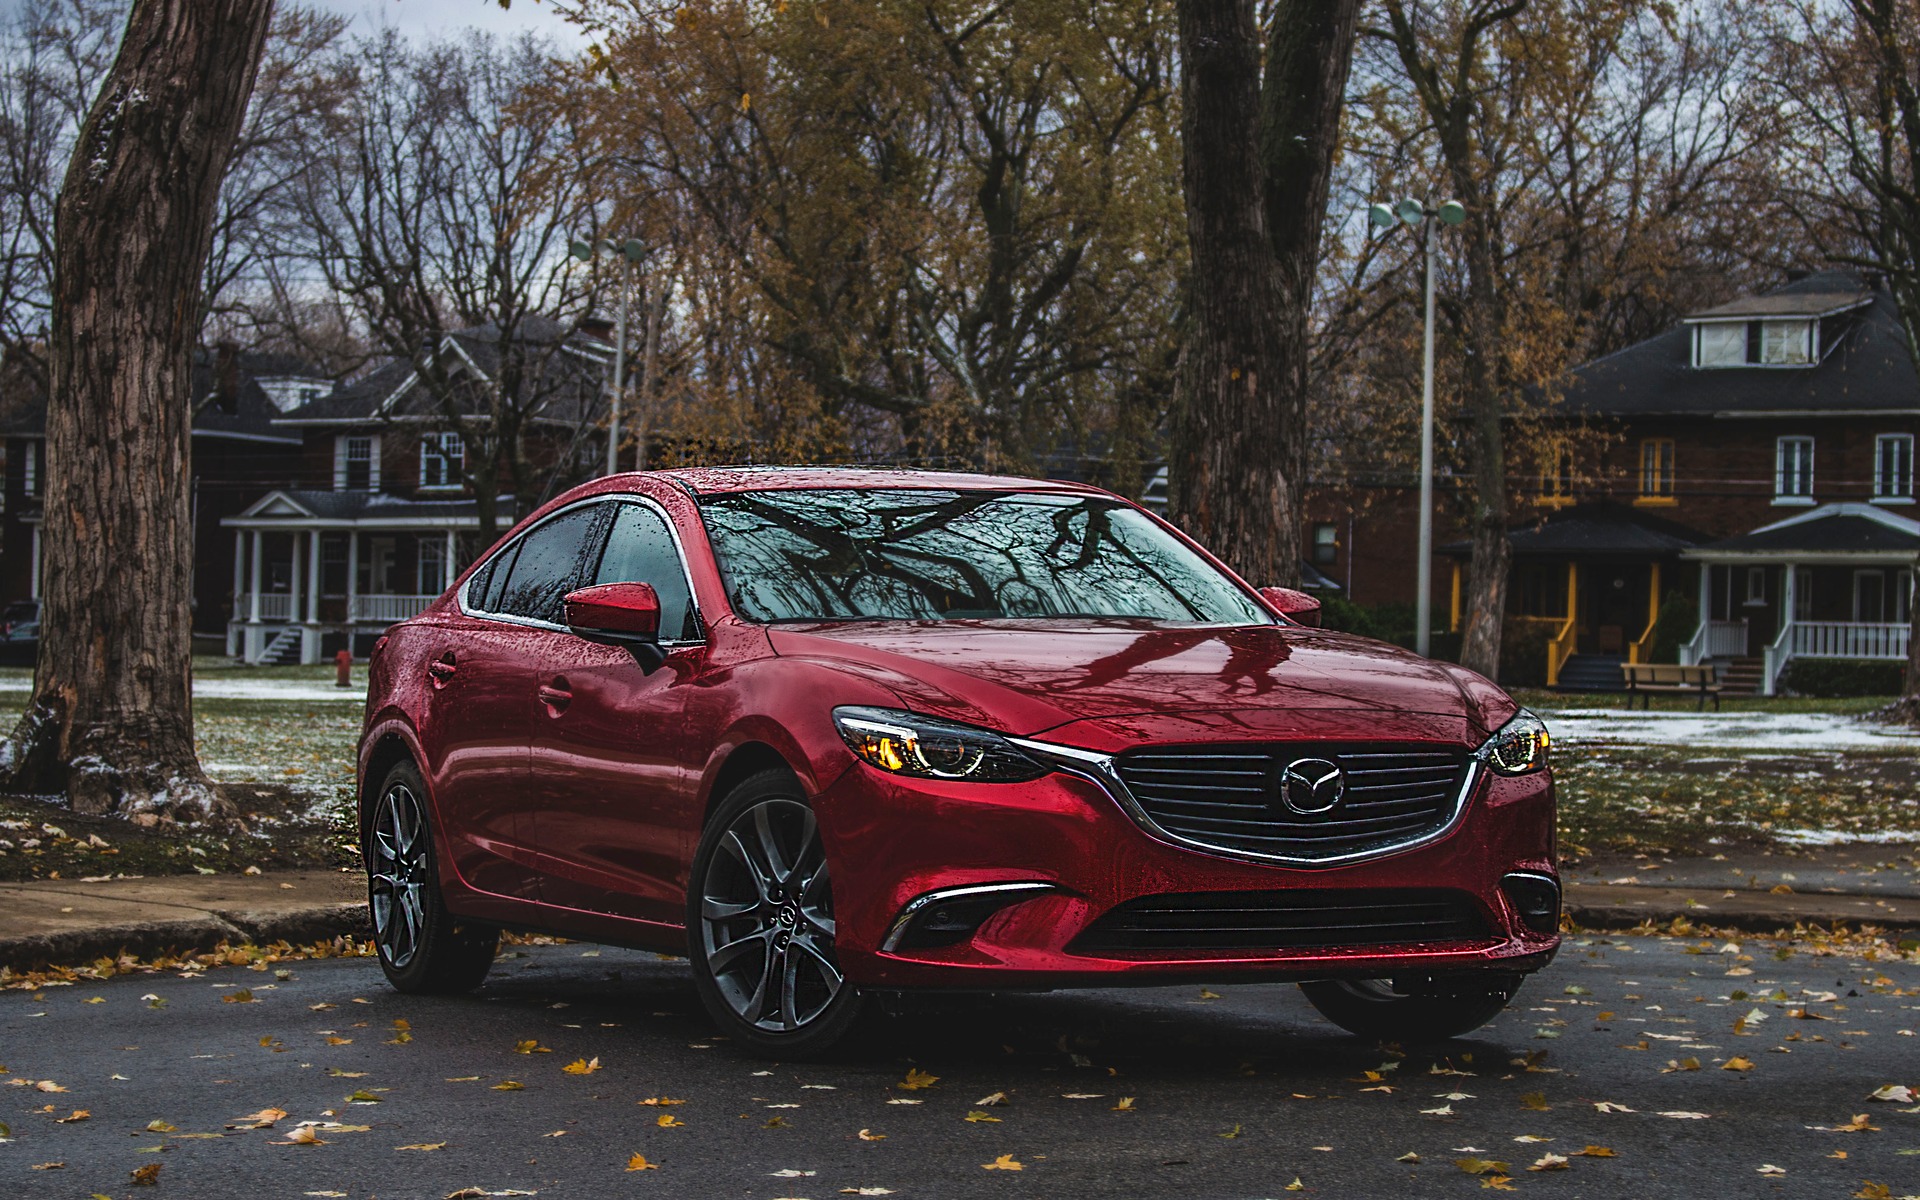 2017 Mazda6: It's Time for a Change - The Car Guide